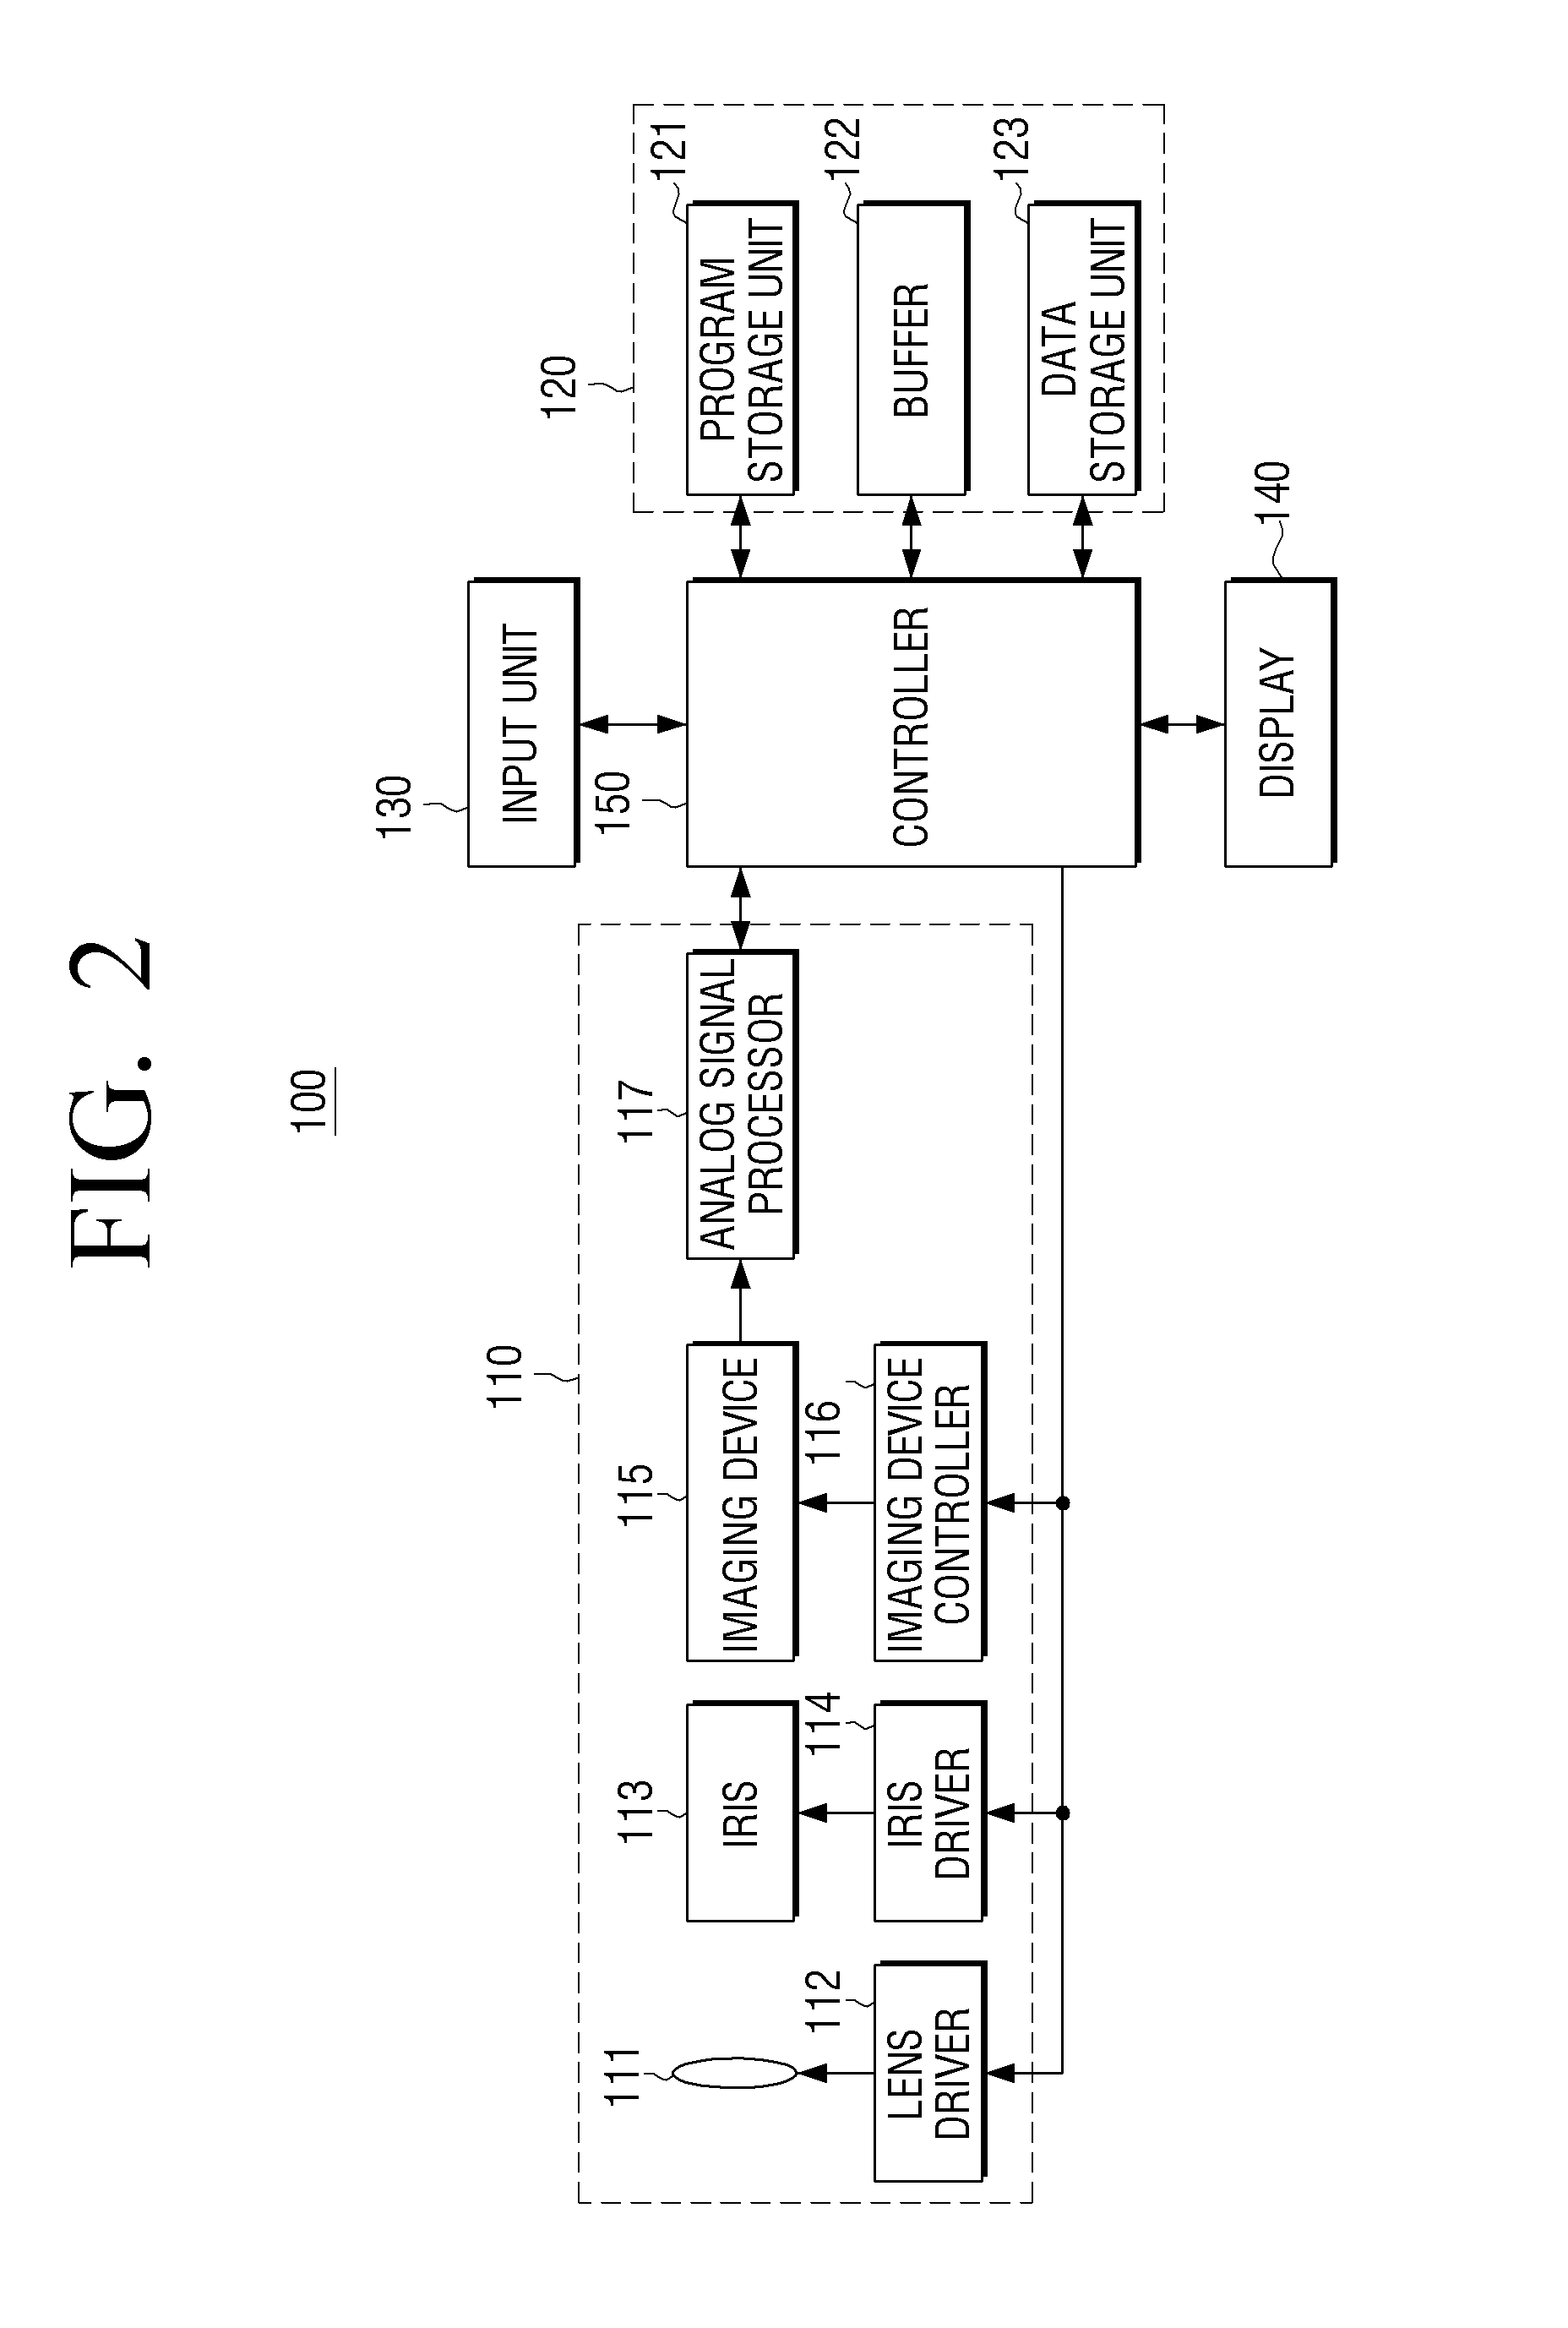 Digital photographing apparatus and control method thereof